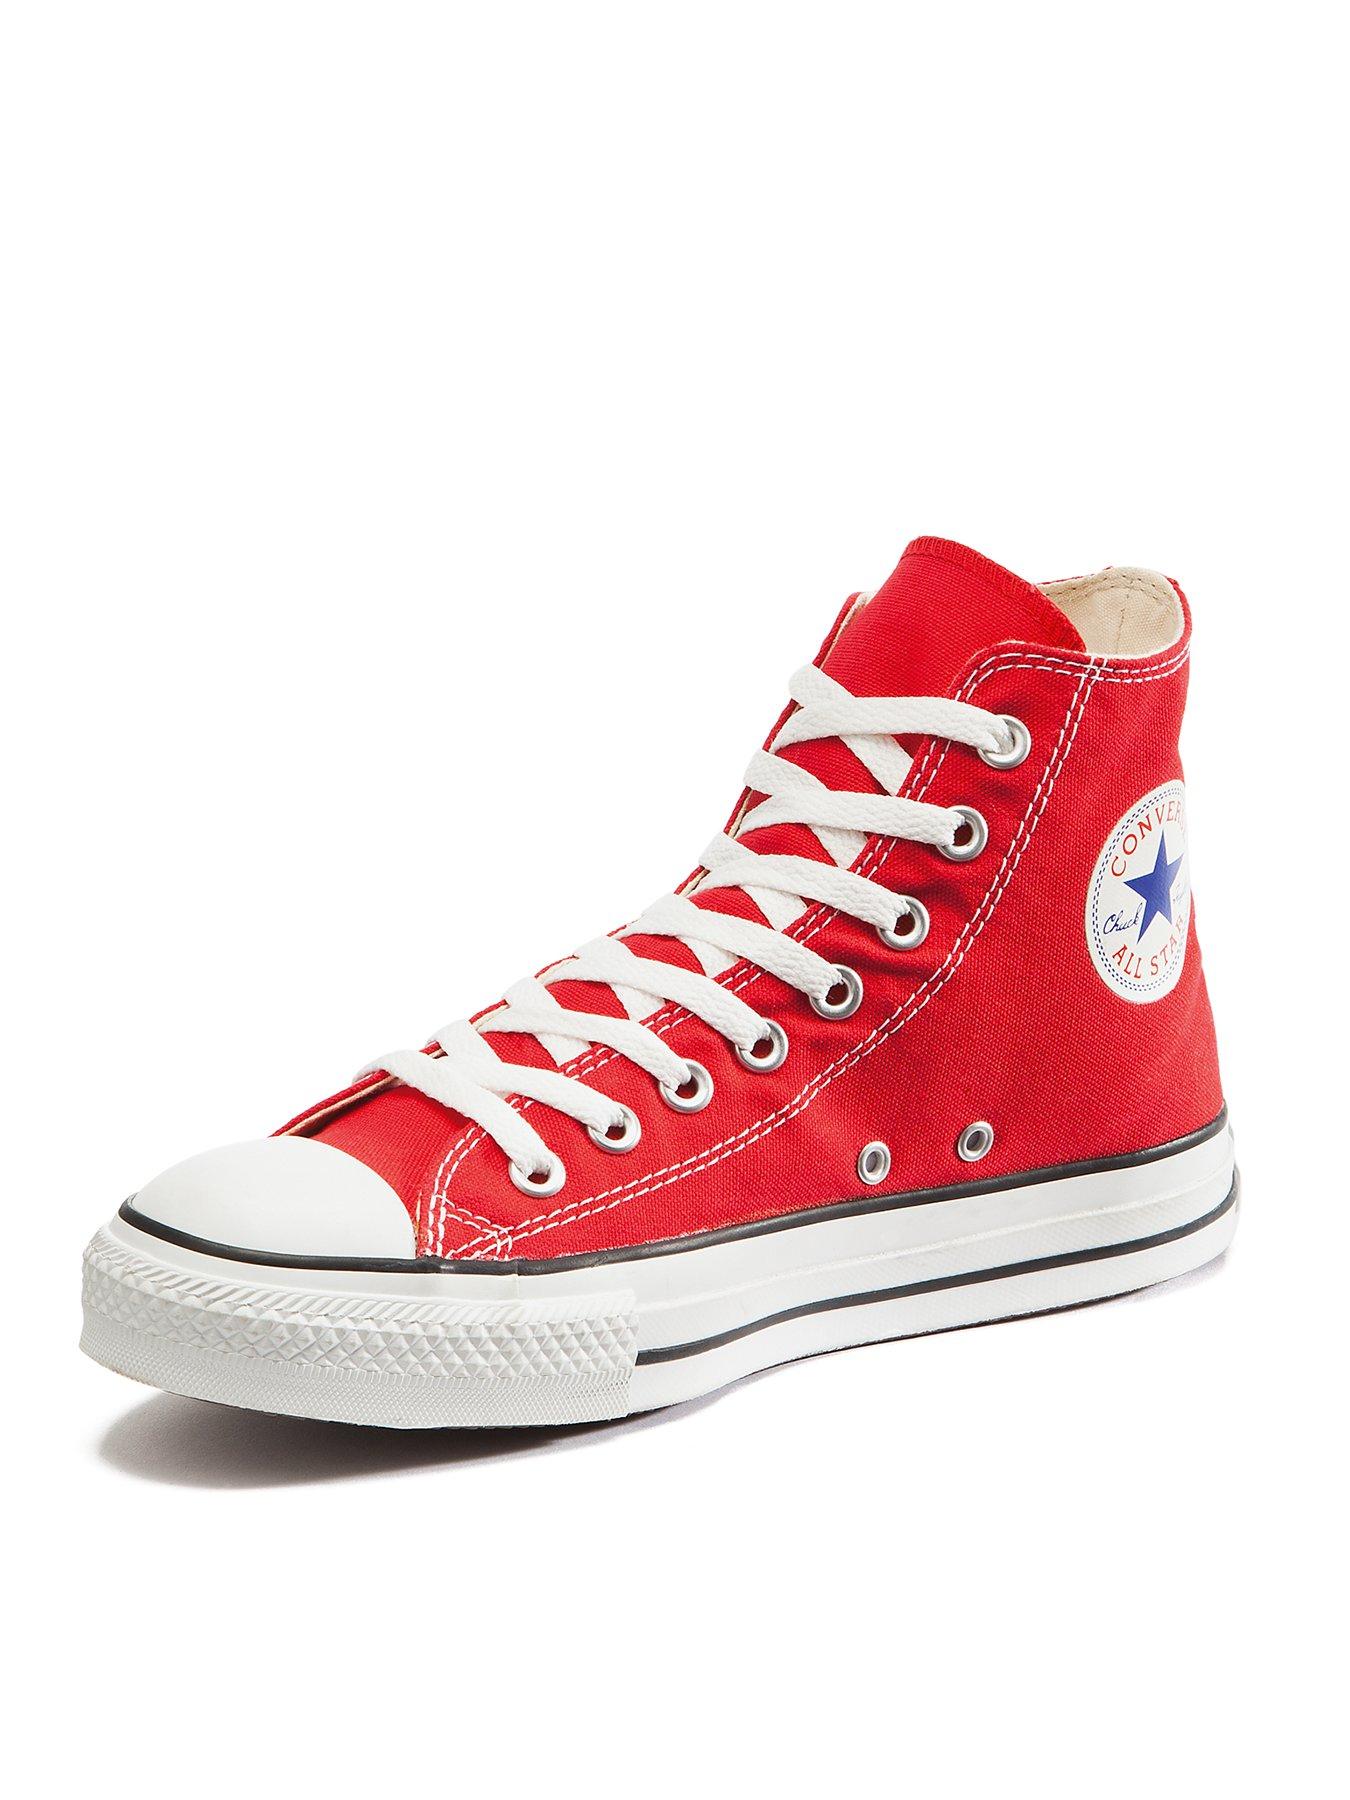 red converse uk